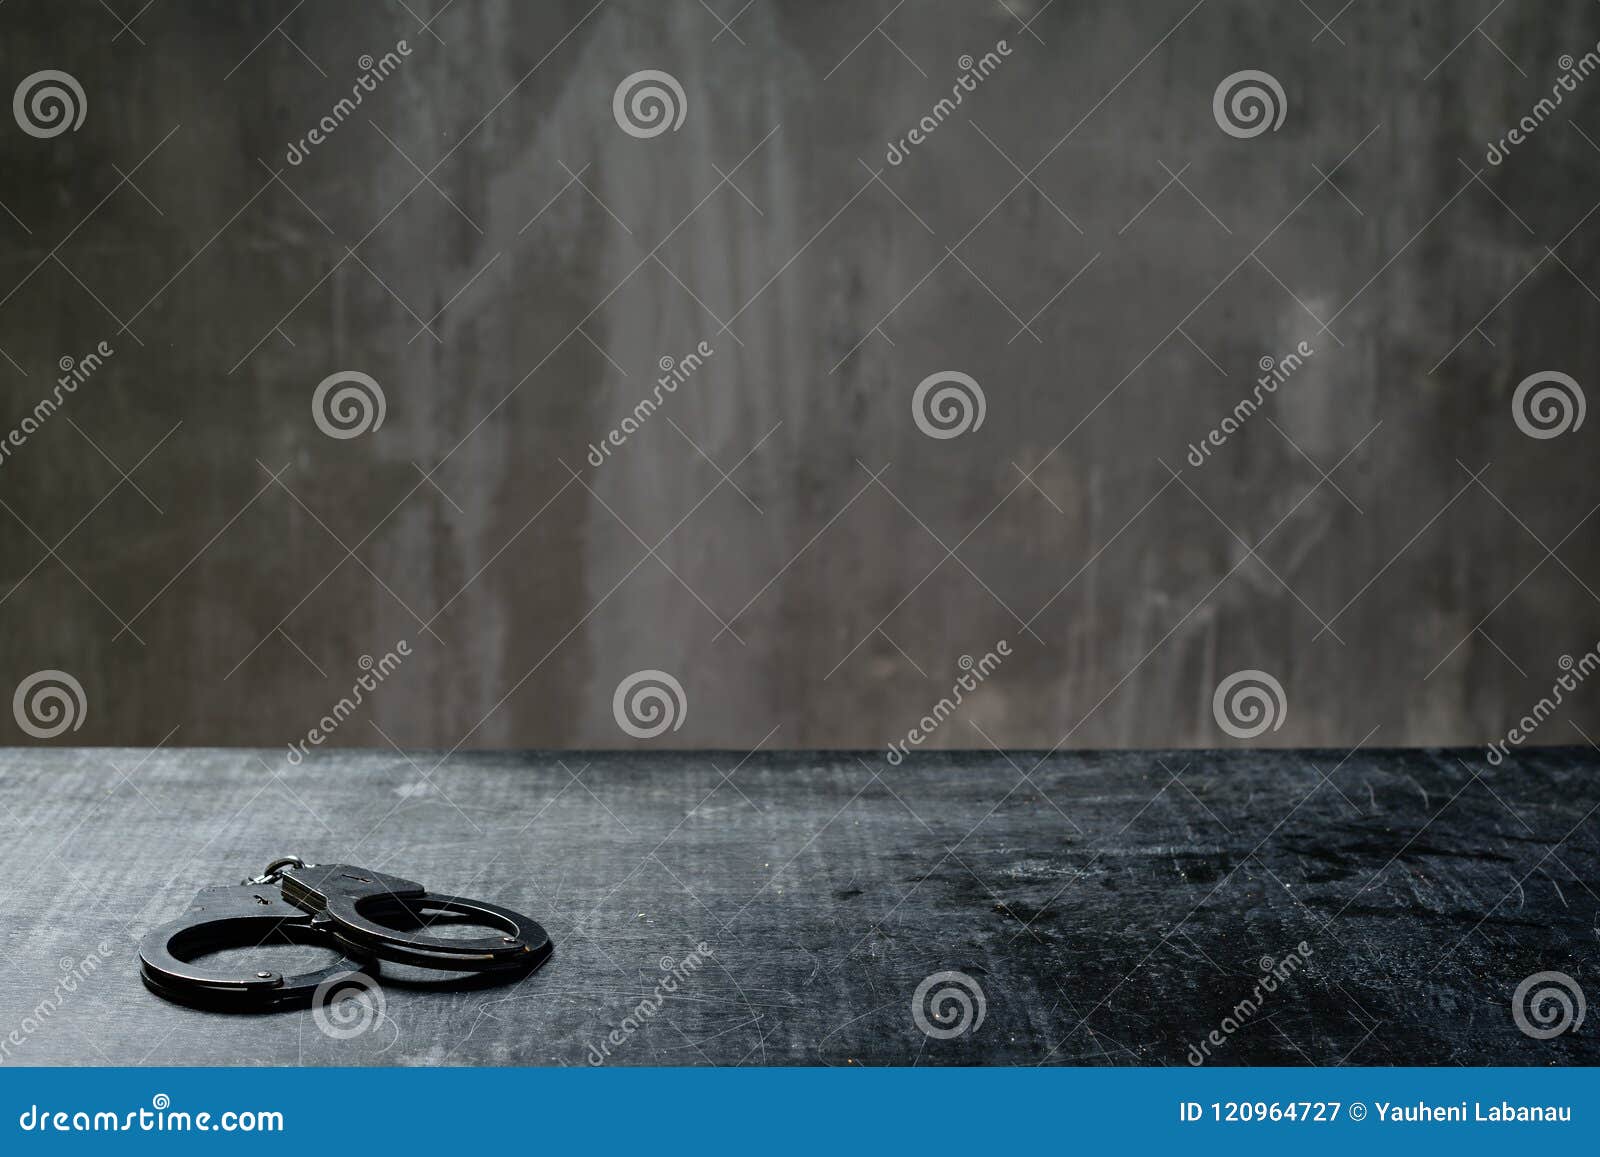 front view of metal handcuffs on table in interrogation room